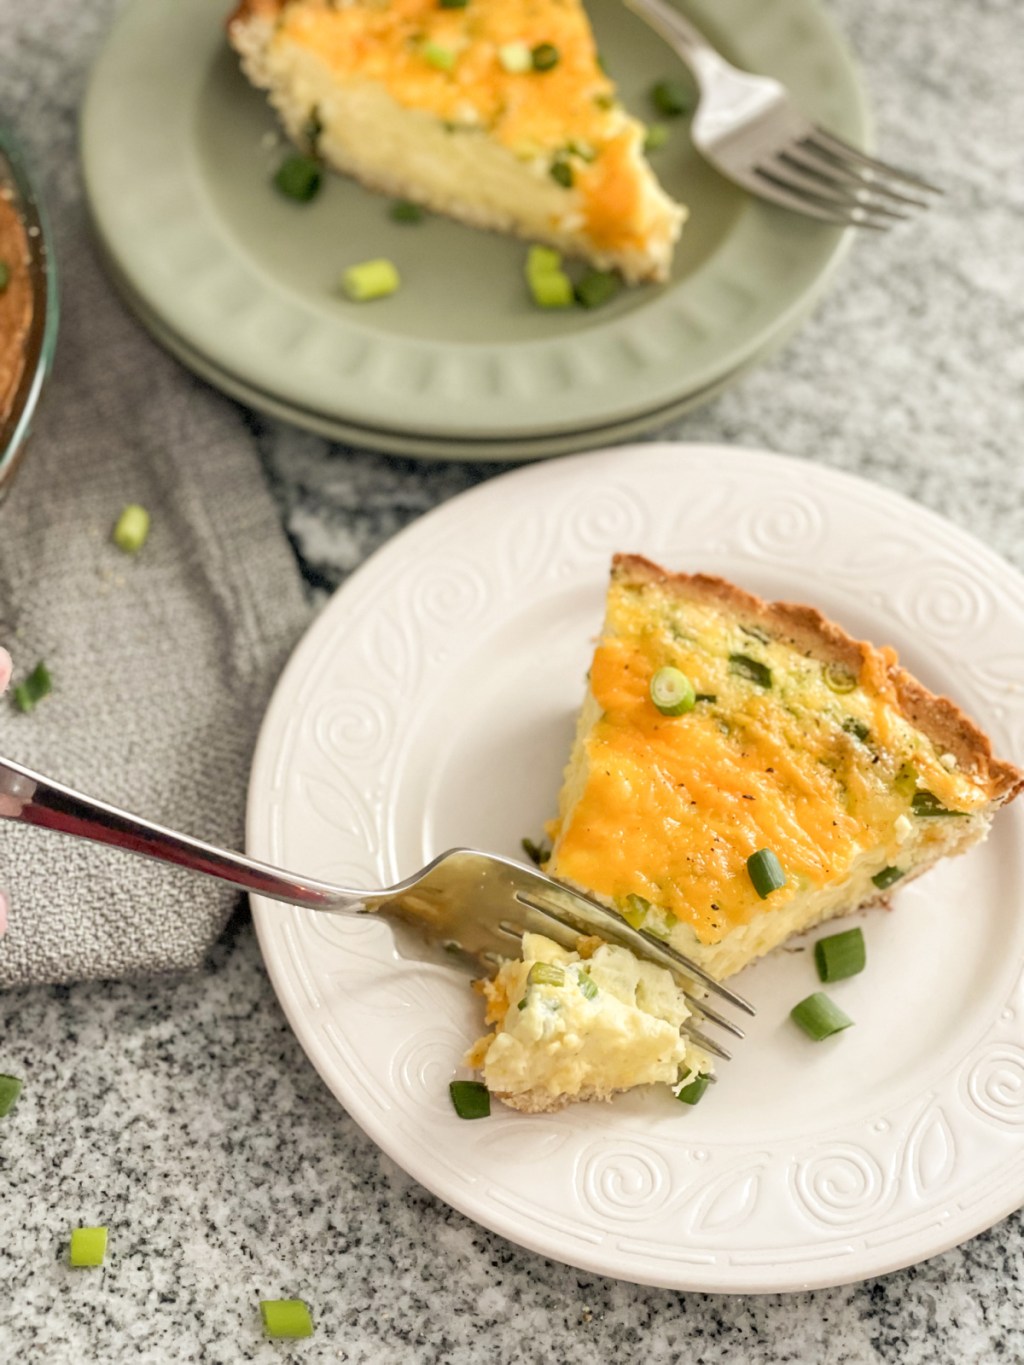 cutting into keto quiche with a fork to take a bite